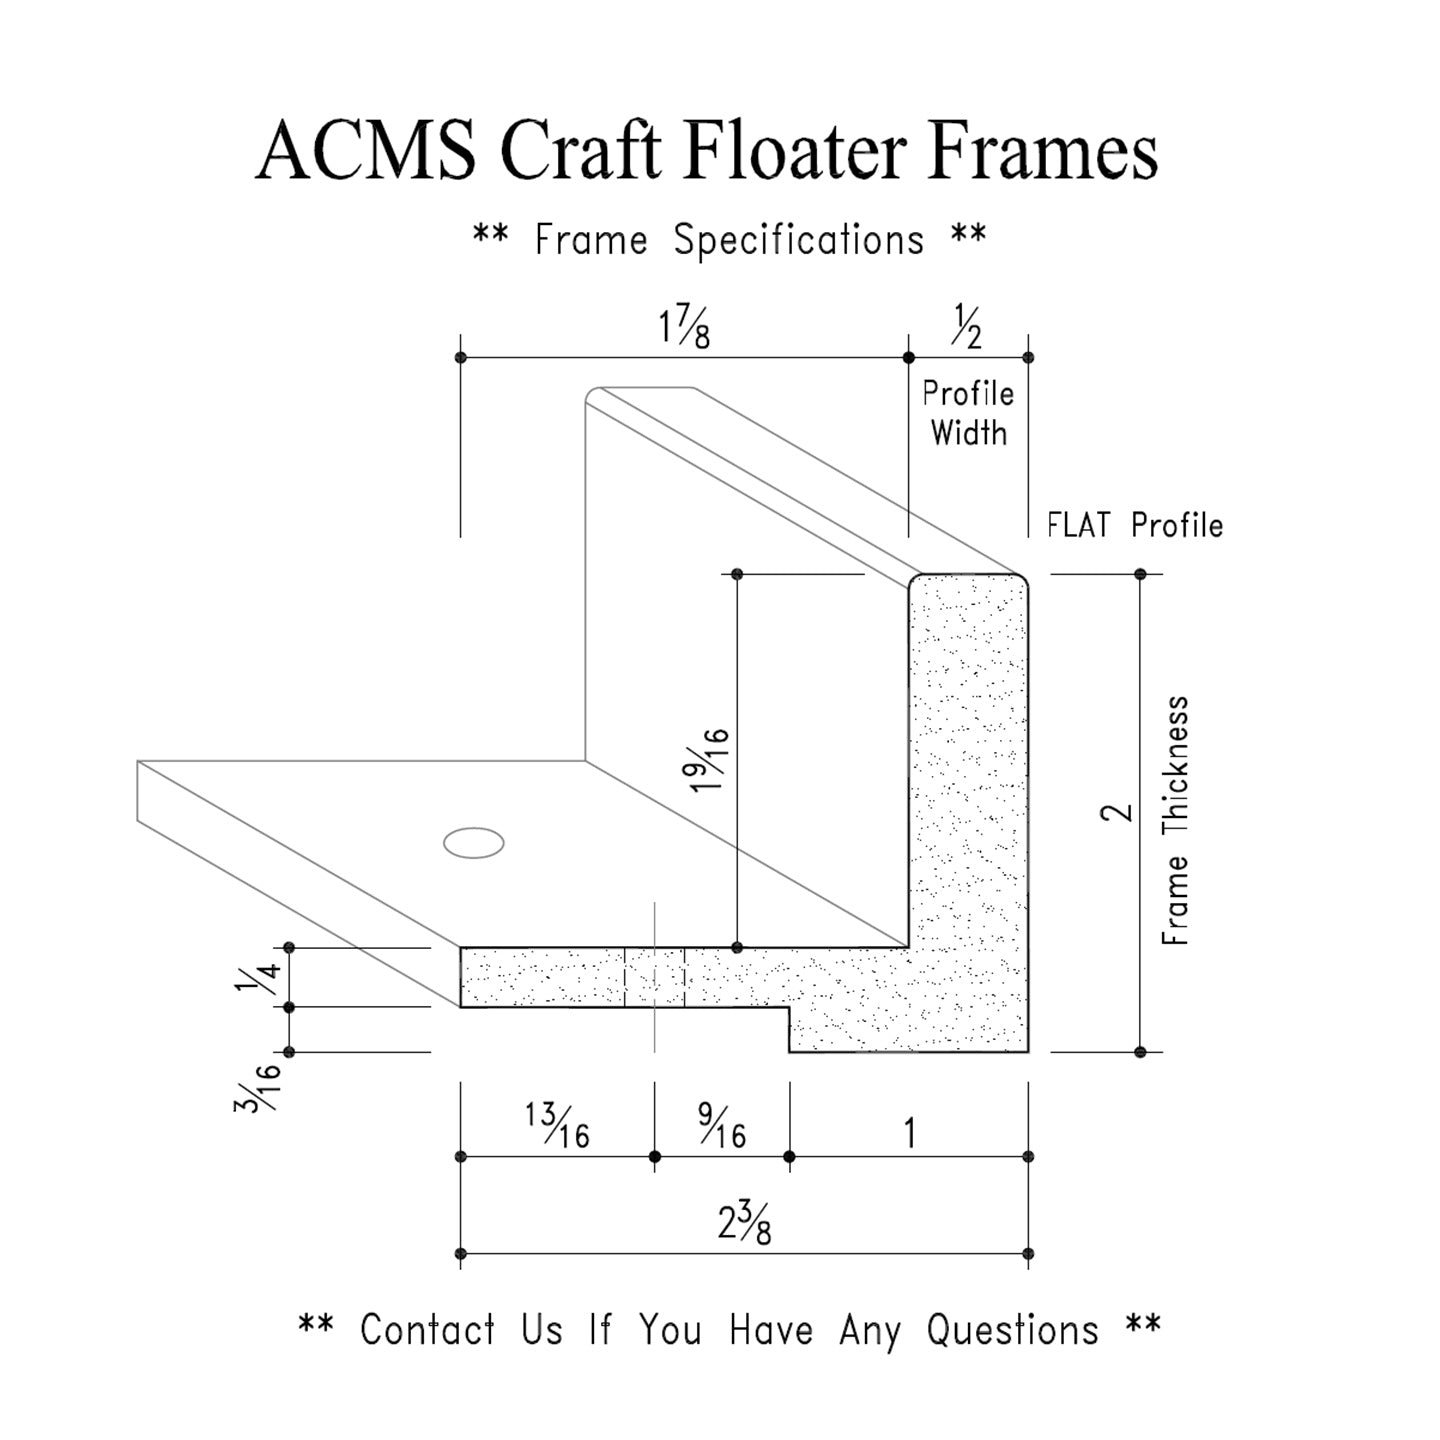 ACMS Soft Square Craft Floater Frame - For 1 1/2" Thick Artwork - Profile 1/2" FLAT